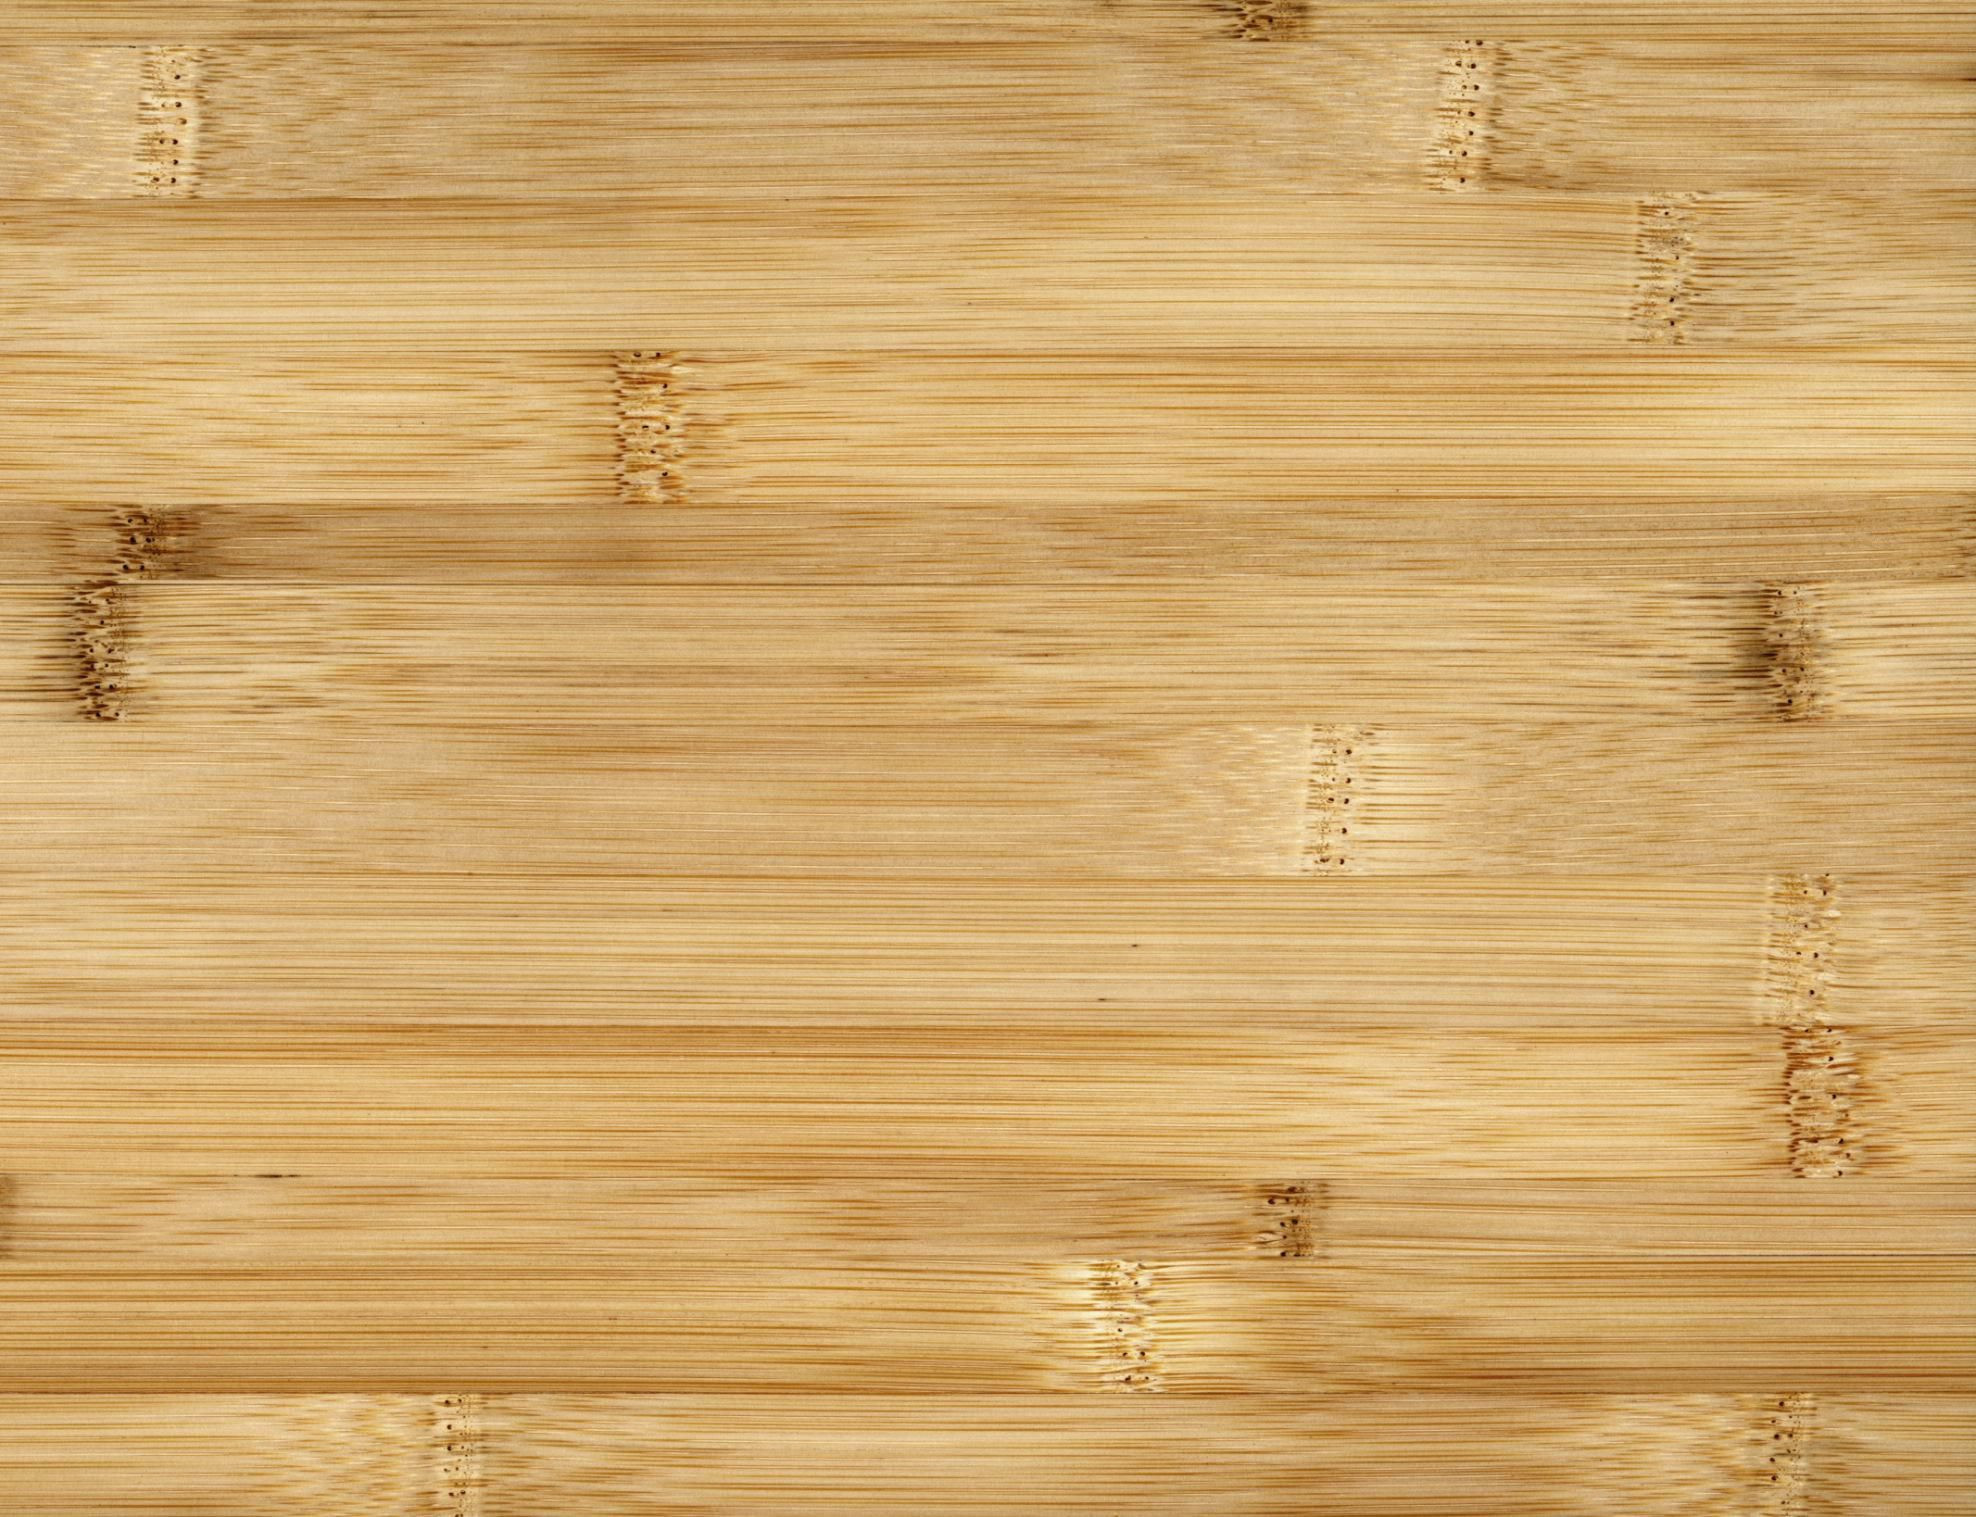 12 attractive Arizona Hardwood Floor Supply Reviews 2024 free download arizona hardwood floor supply reviews of how to clean bamboo flooring throughout 200266305 001 56a2fd815f9b58b7d0d000cd